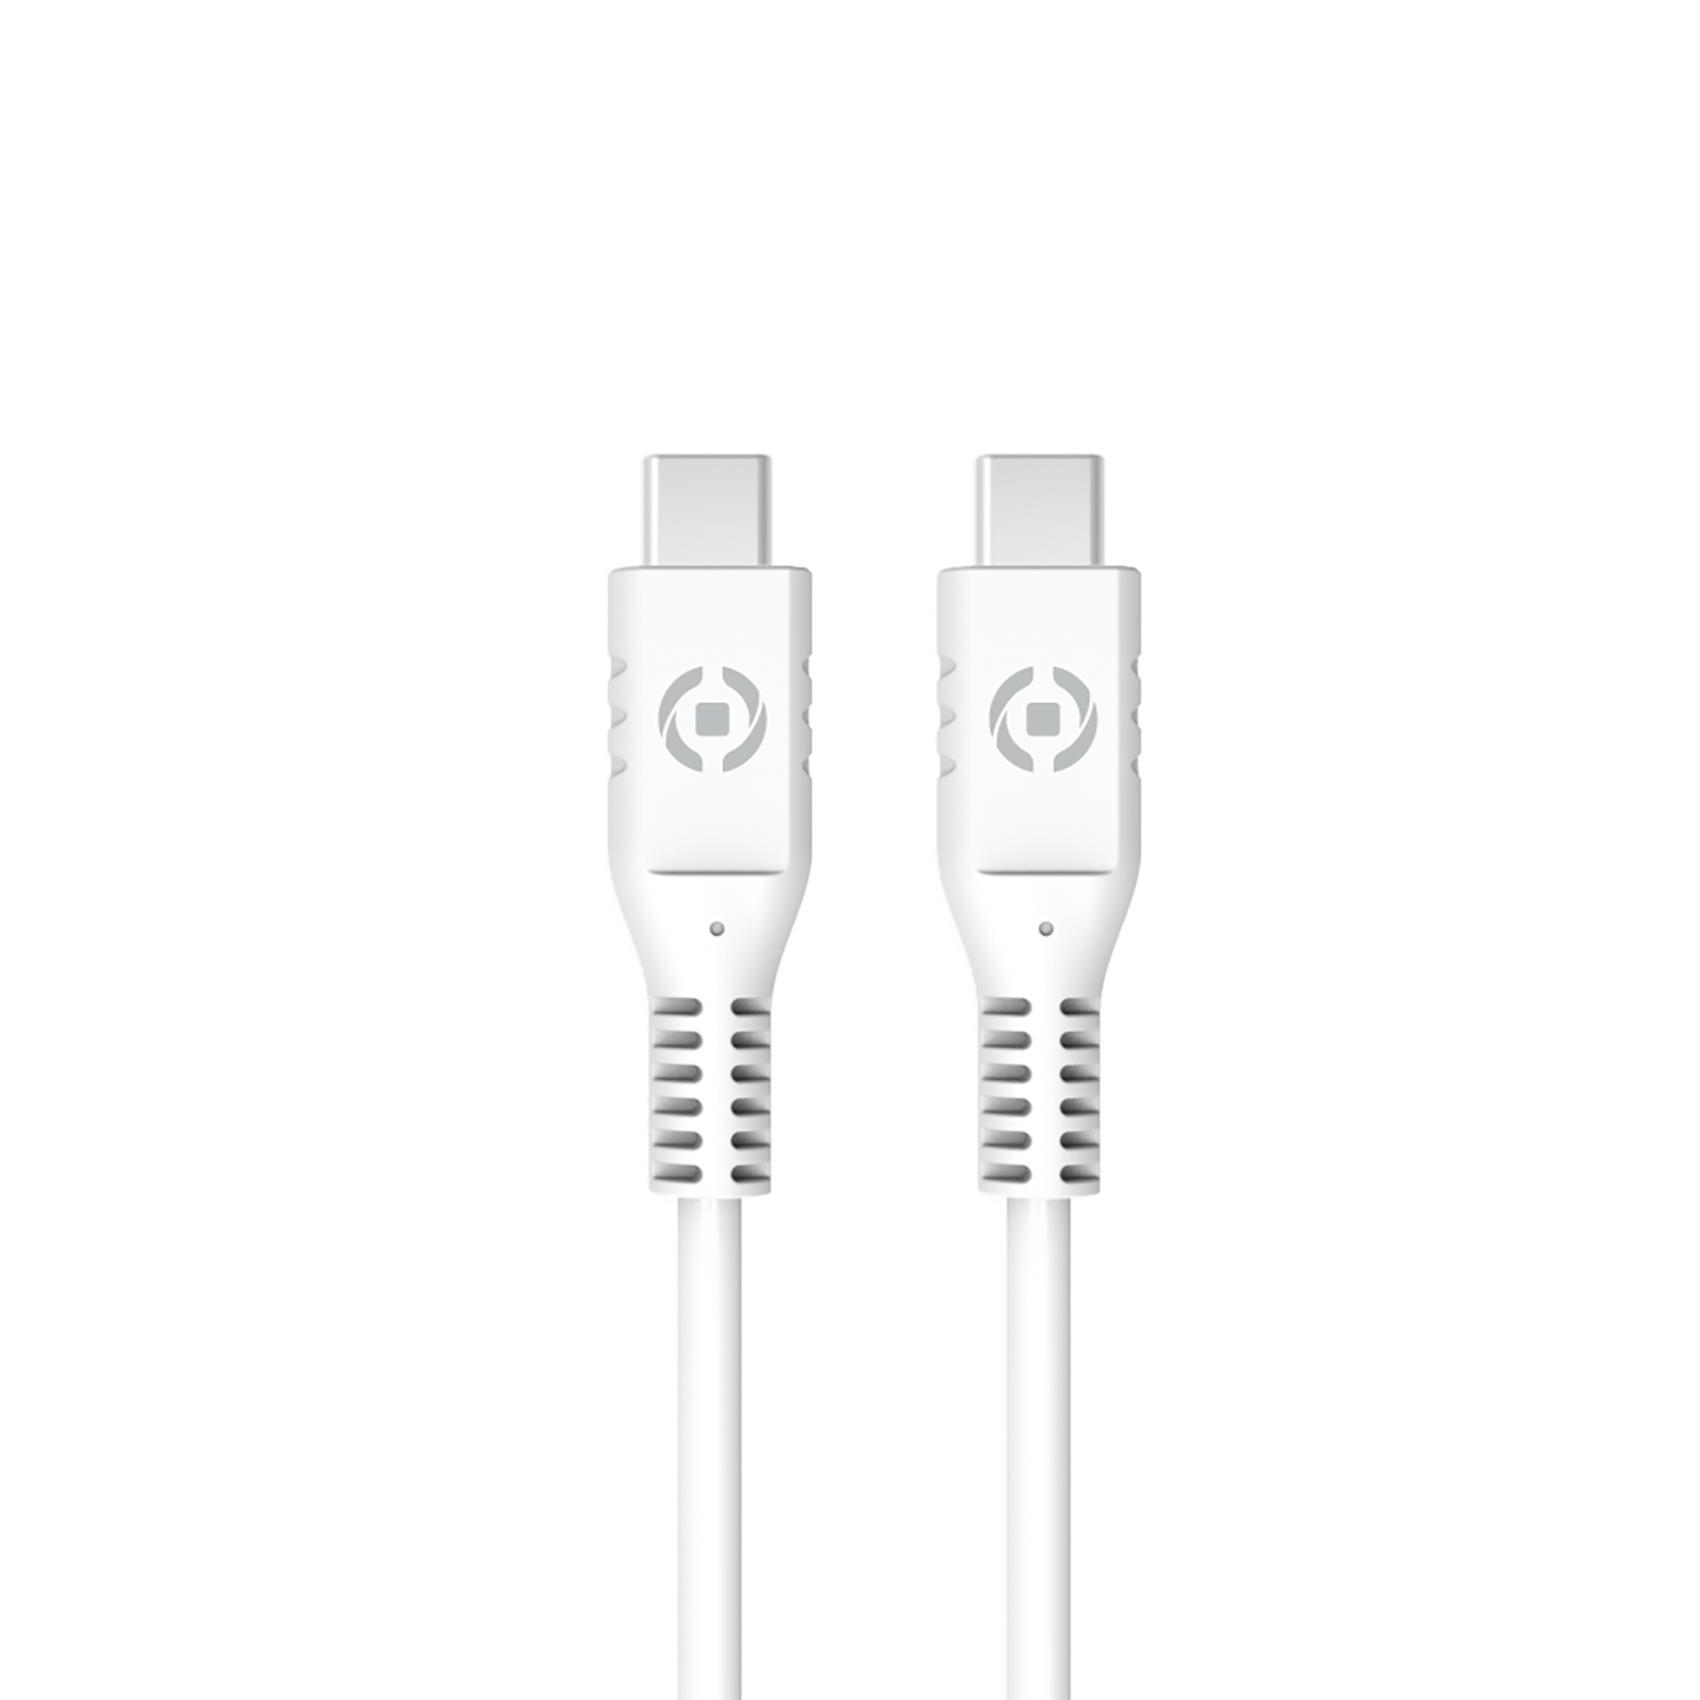 Rtg 1m Cable Usb C Usb C White Celly Rtgusbcusbcwh 8021735196198